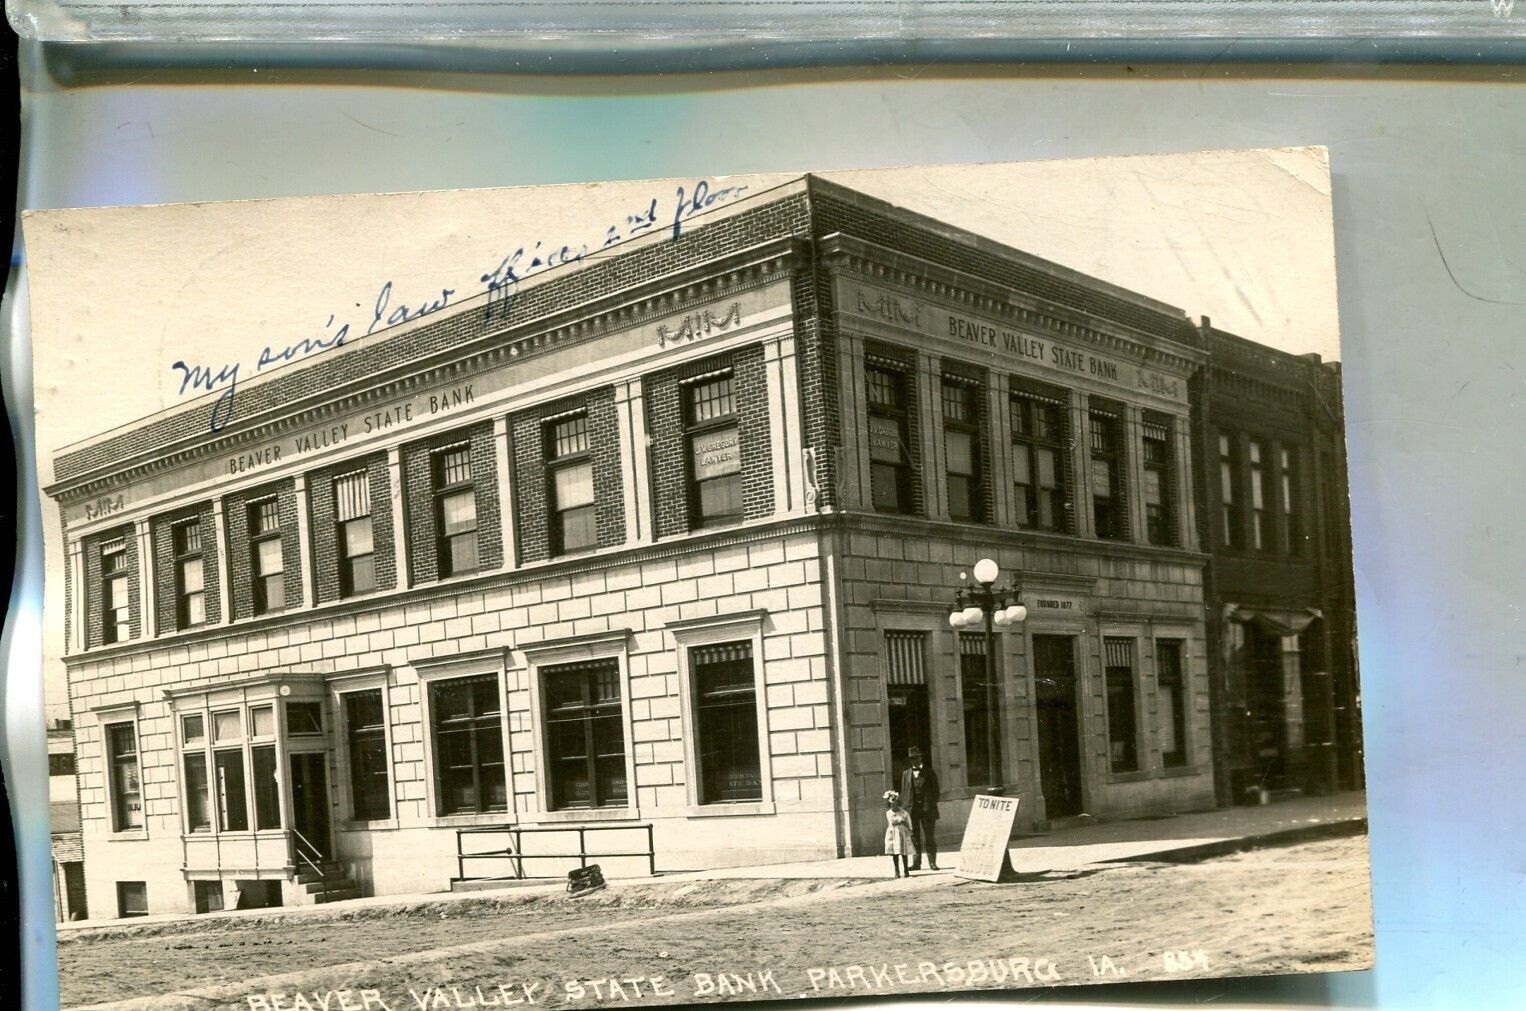 PARKERSBURG IOWA STATE BANK REAL PHOTO POSTCARD 1736S